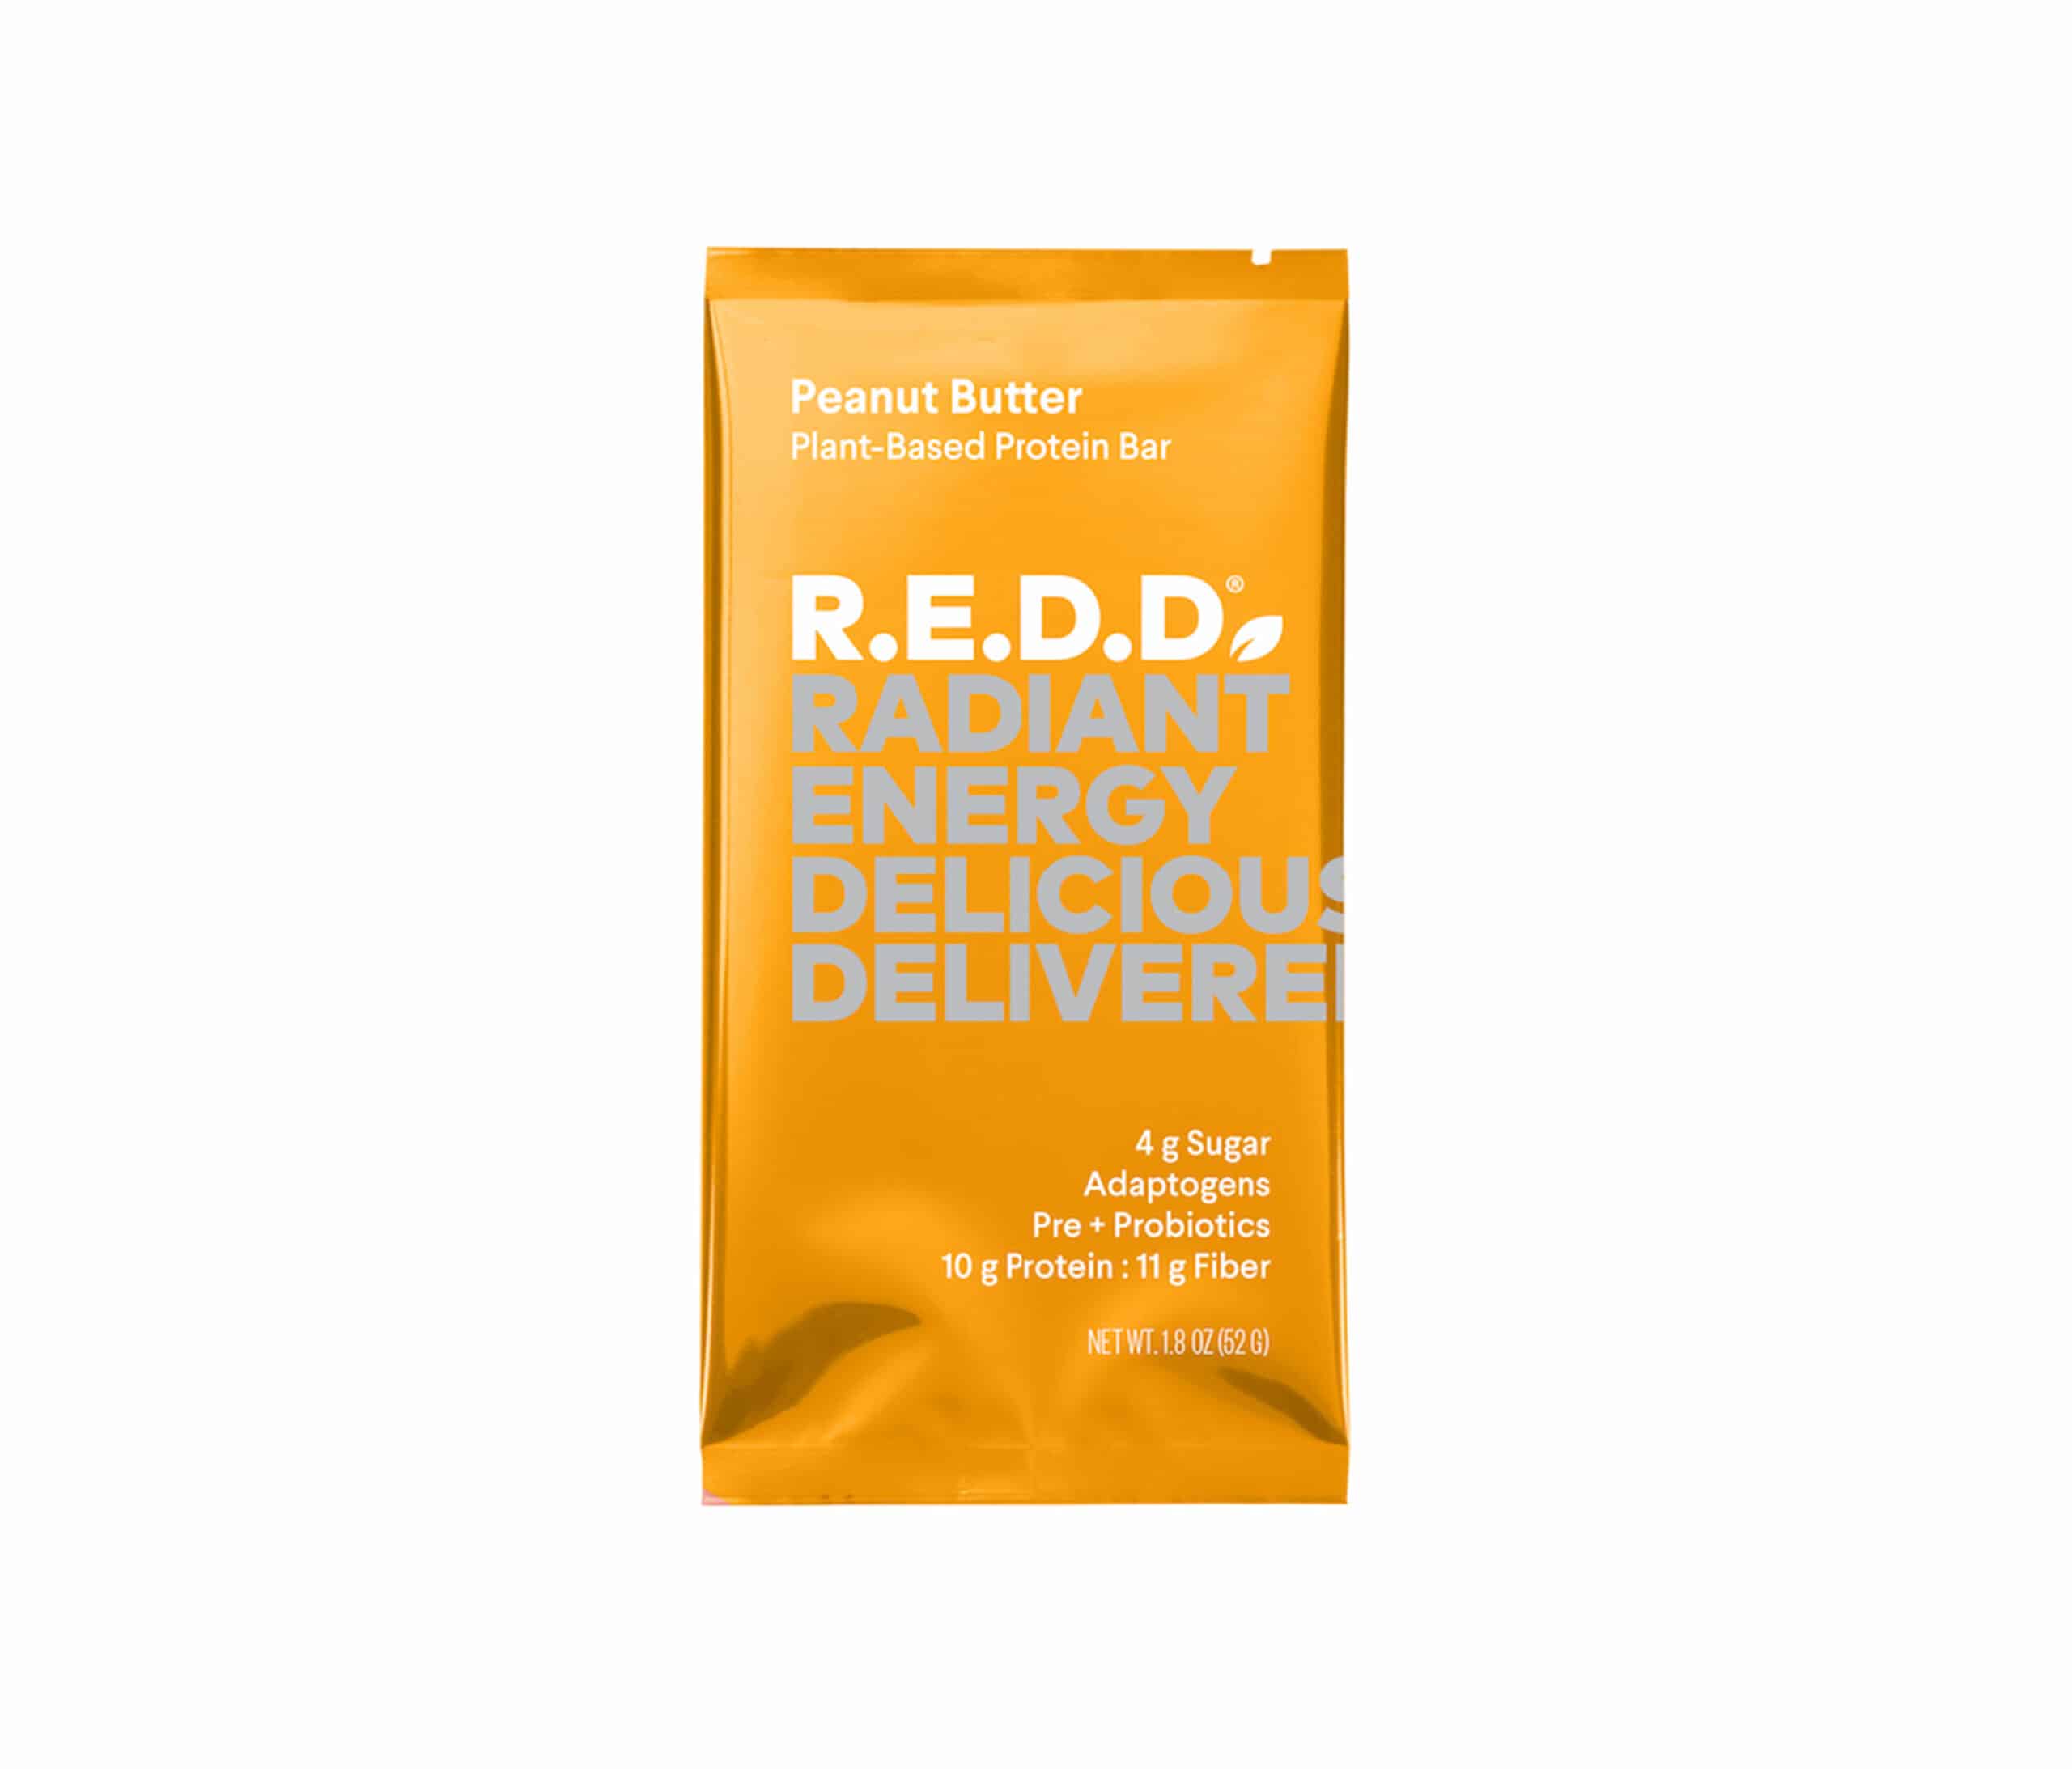 Peanut Butter Plant-Based Protein Bar by R.E.D.D. - GTFO ...